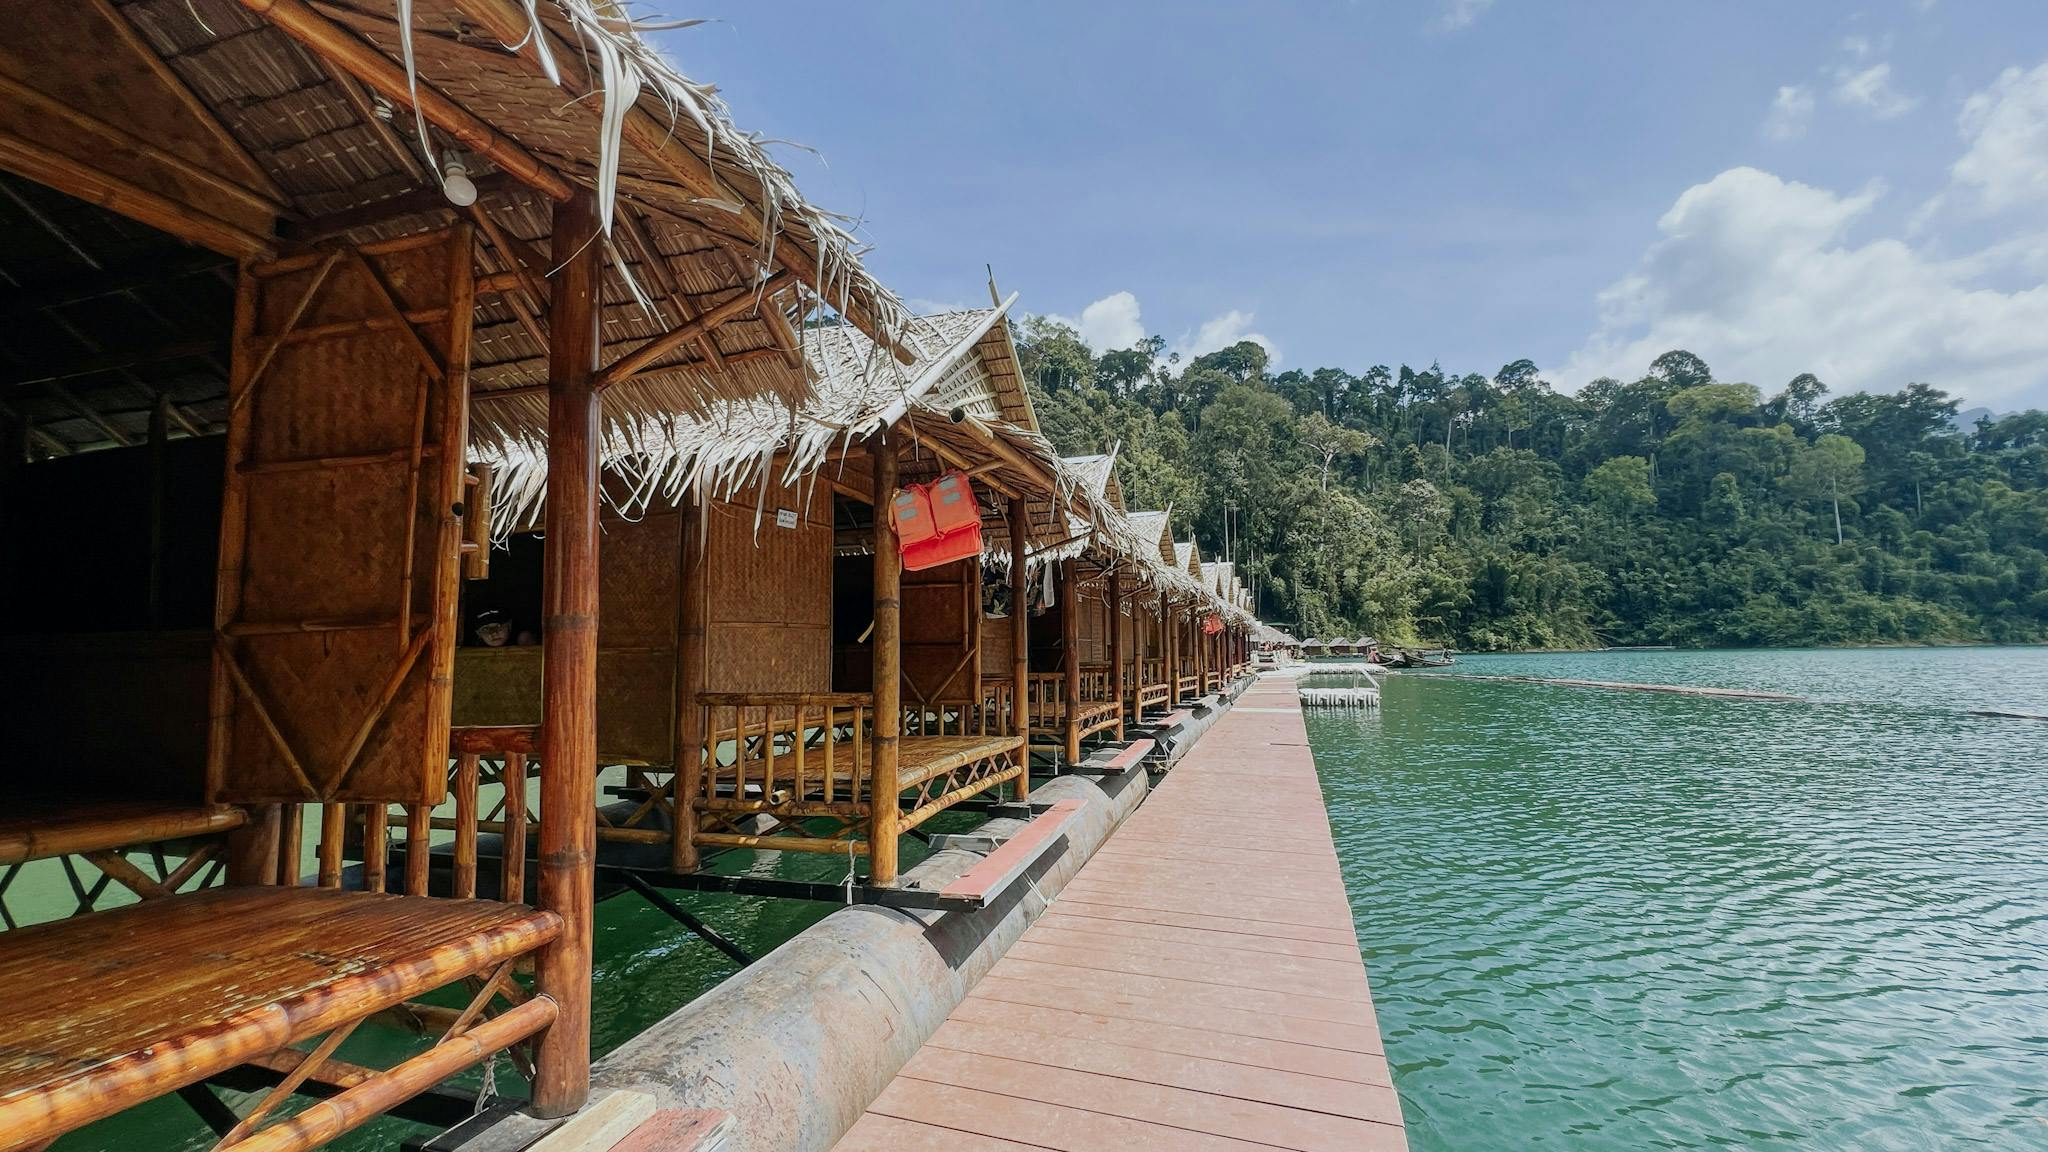 For unforgettable views, stay at a floating hut at Khao Sok National Park 